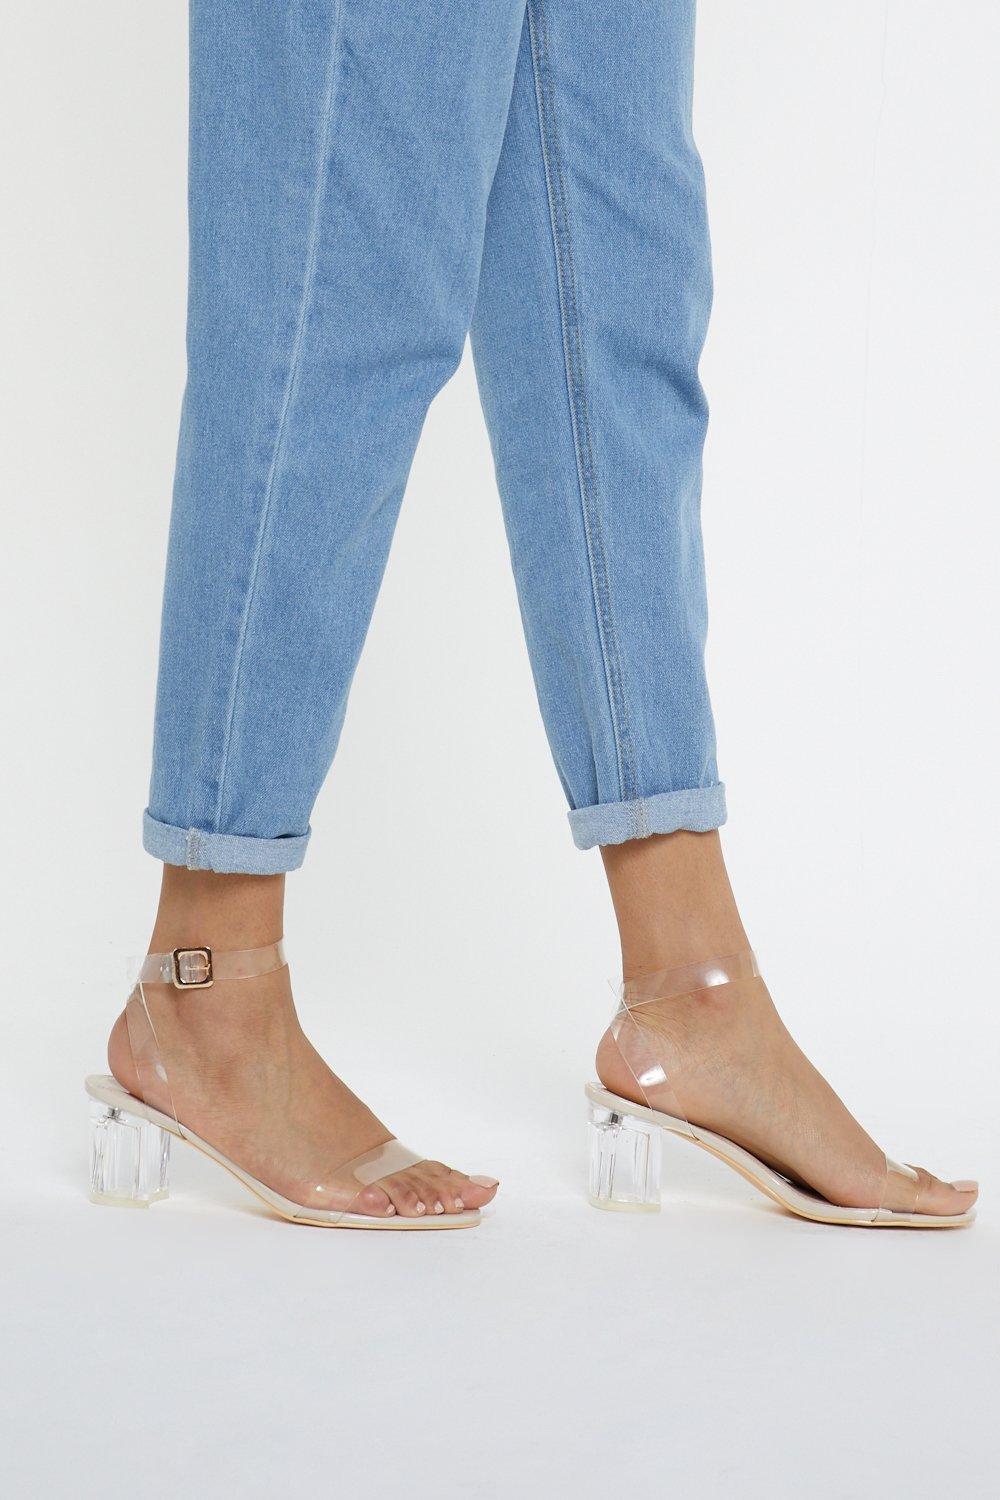 clear shoes with low heels